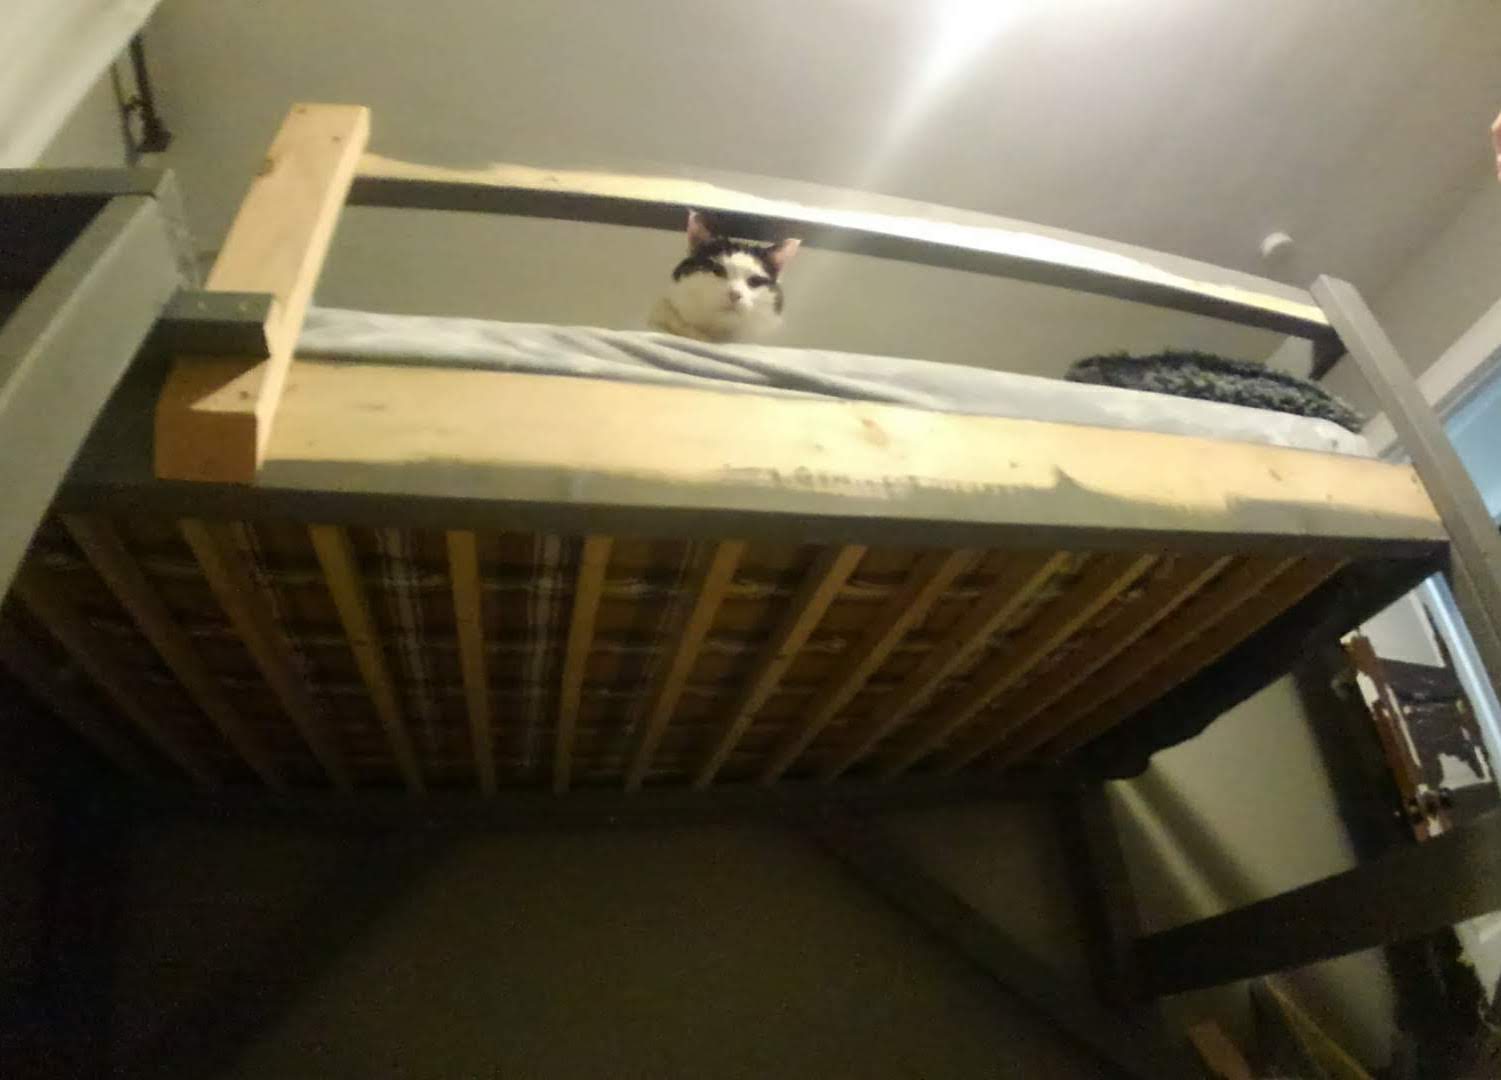 A cat looking down from a lofted bed